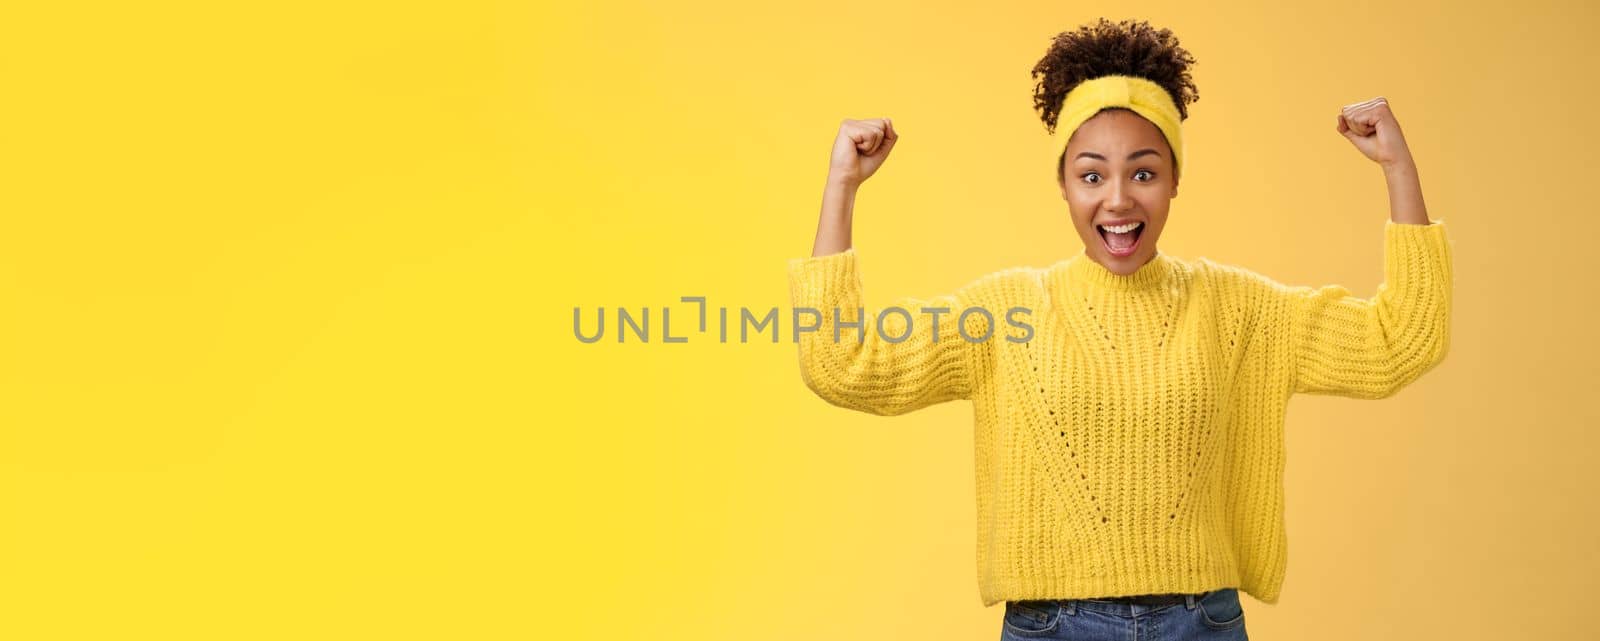 Proud impressed charming girlfriend encourage girlfriend win first place happy for friend rase fists celebration triumph gesture smiling broadly congratulation good work win, yellow background.